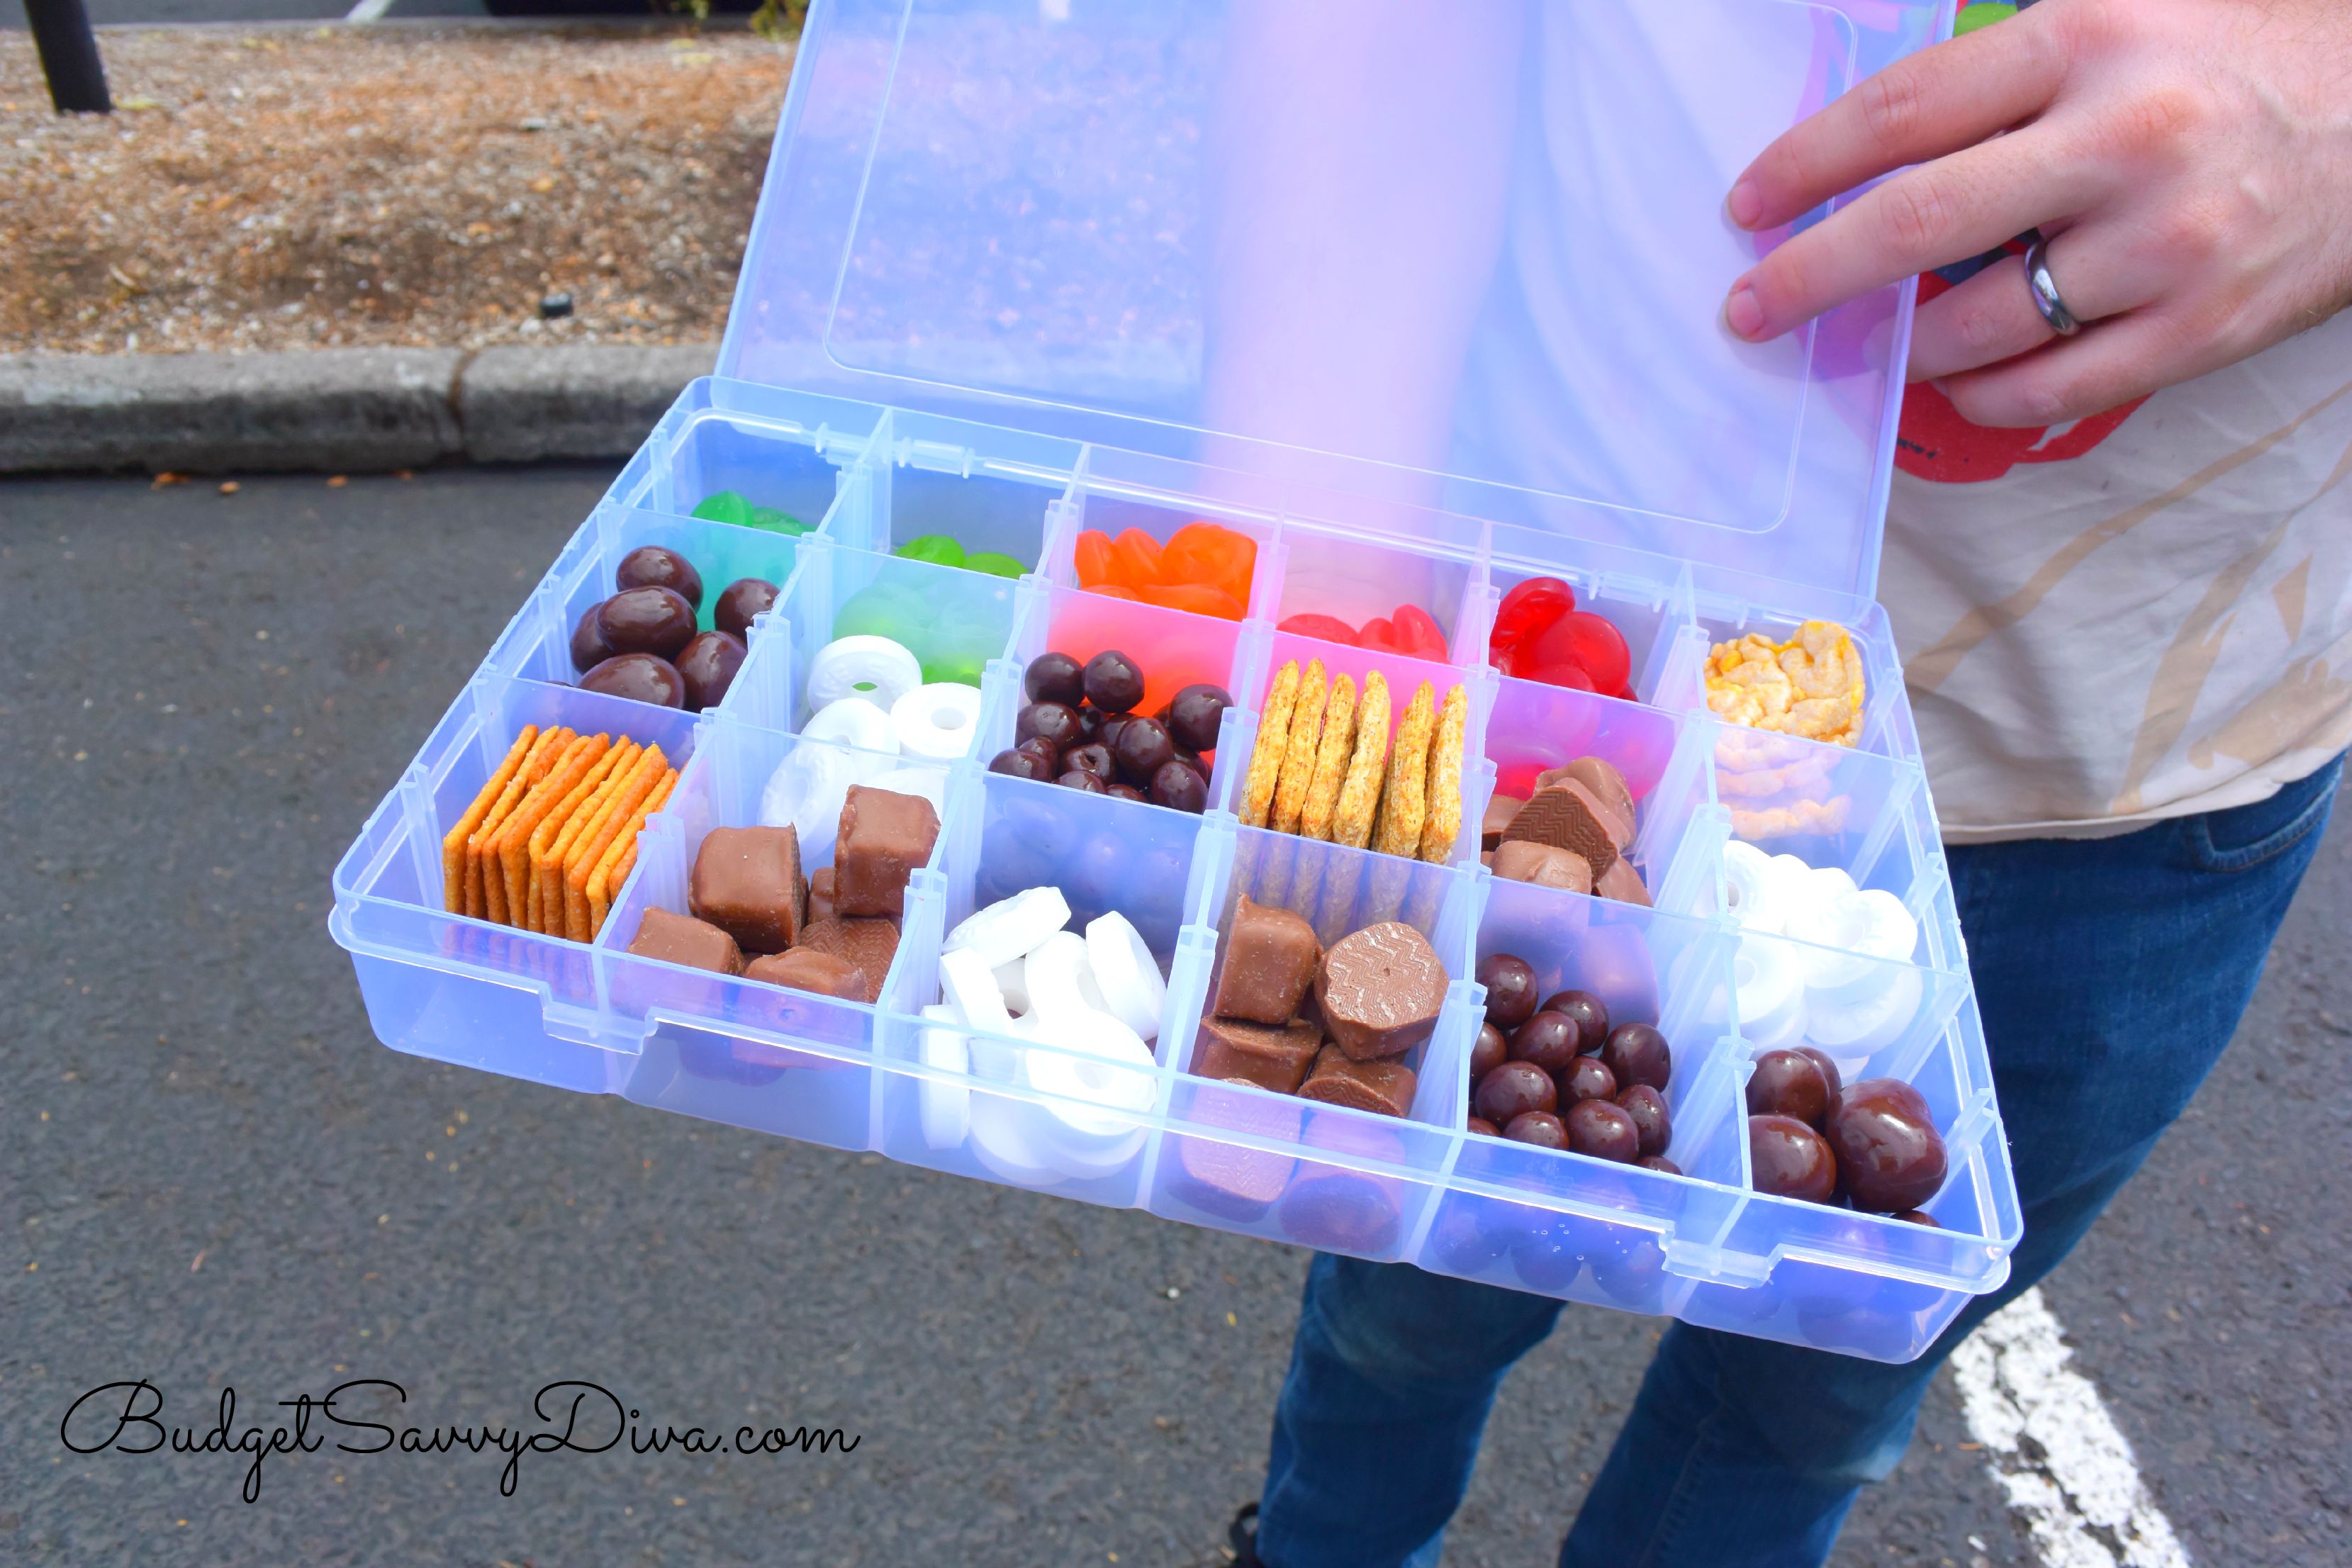 Road trip snack boxes for kids! (Used bead separator boxes) They